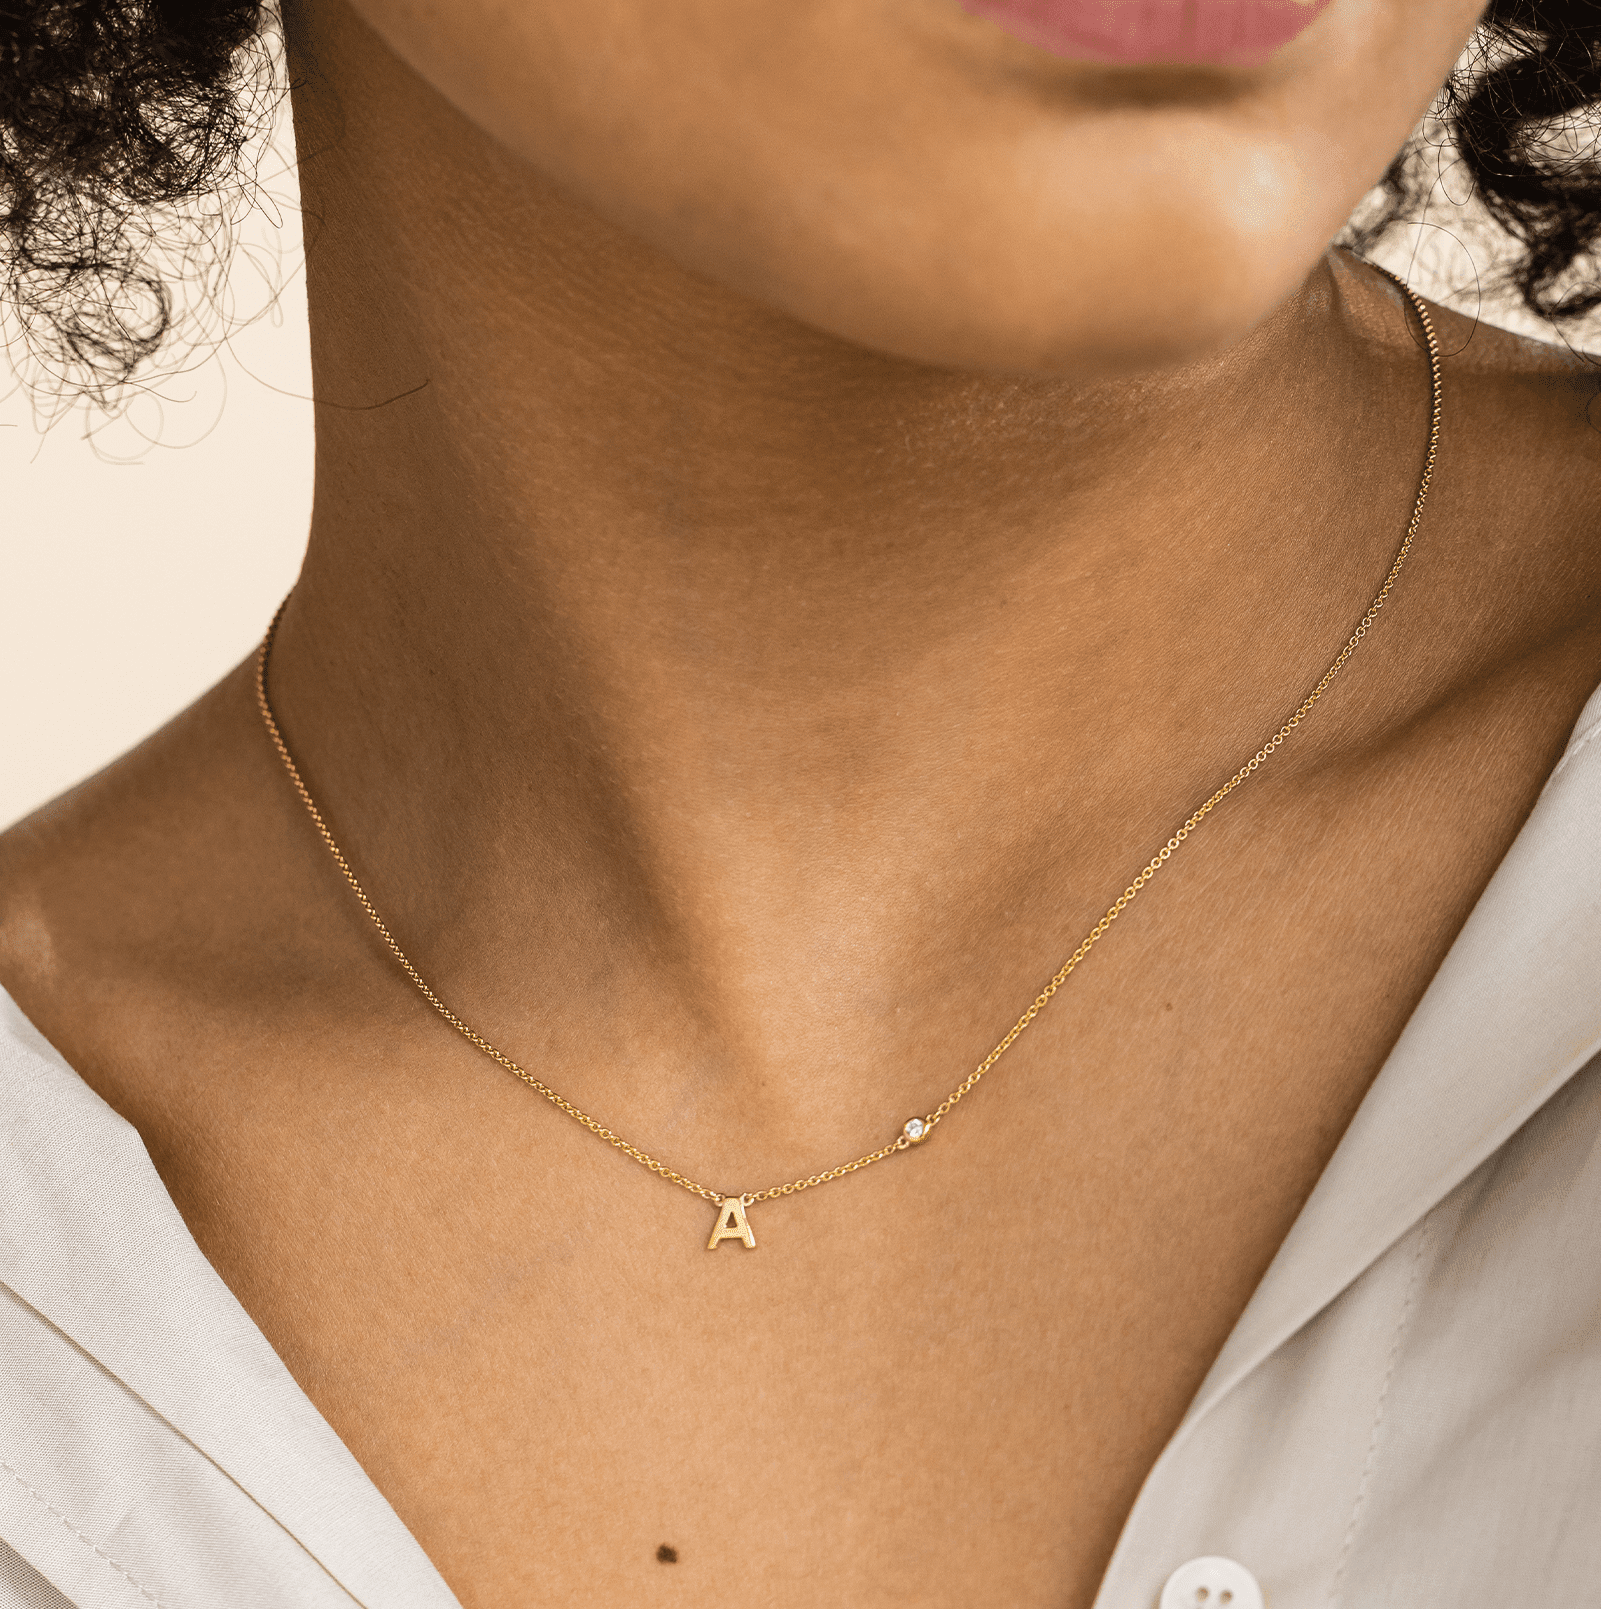 Initial Necklace with Diamonds - 18K Rose Vermeil Necklaces magal-dev 